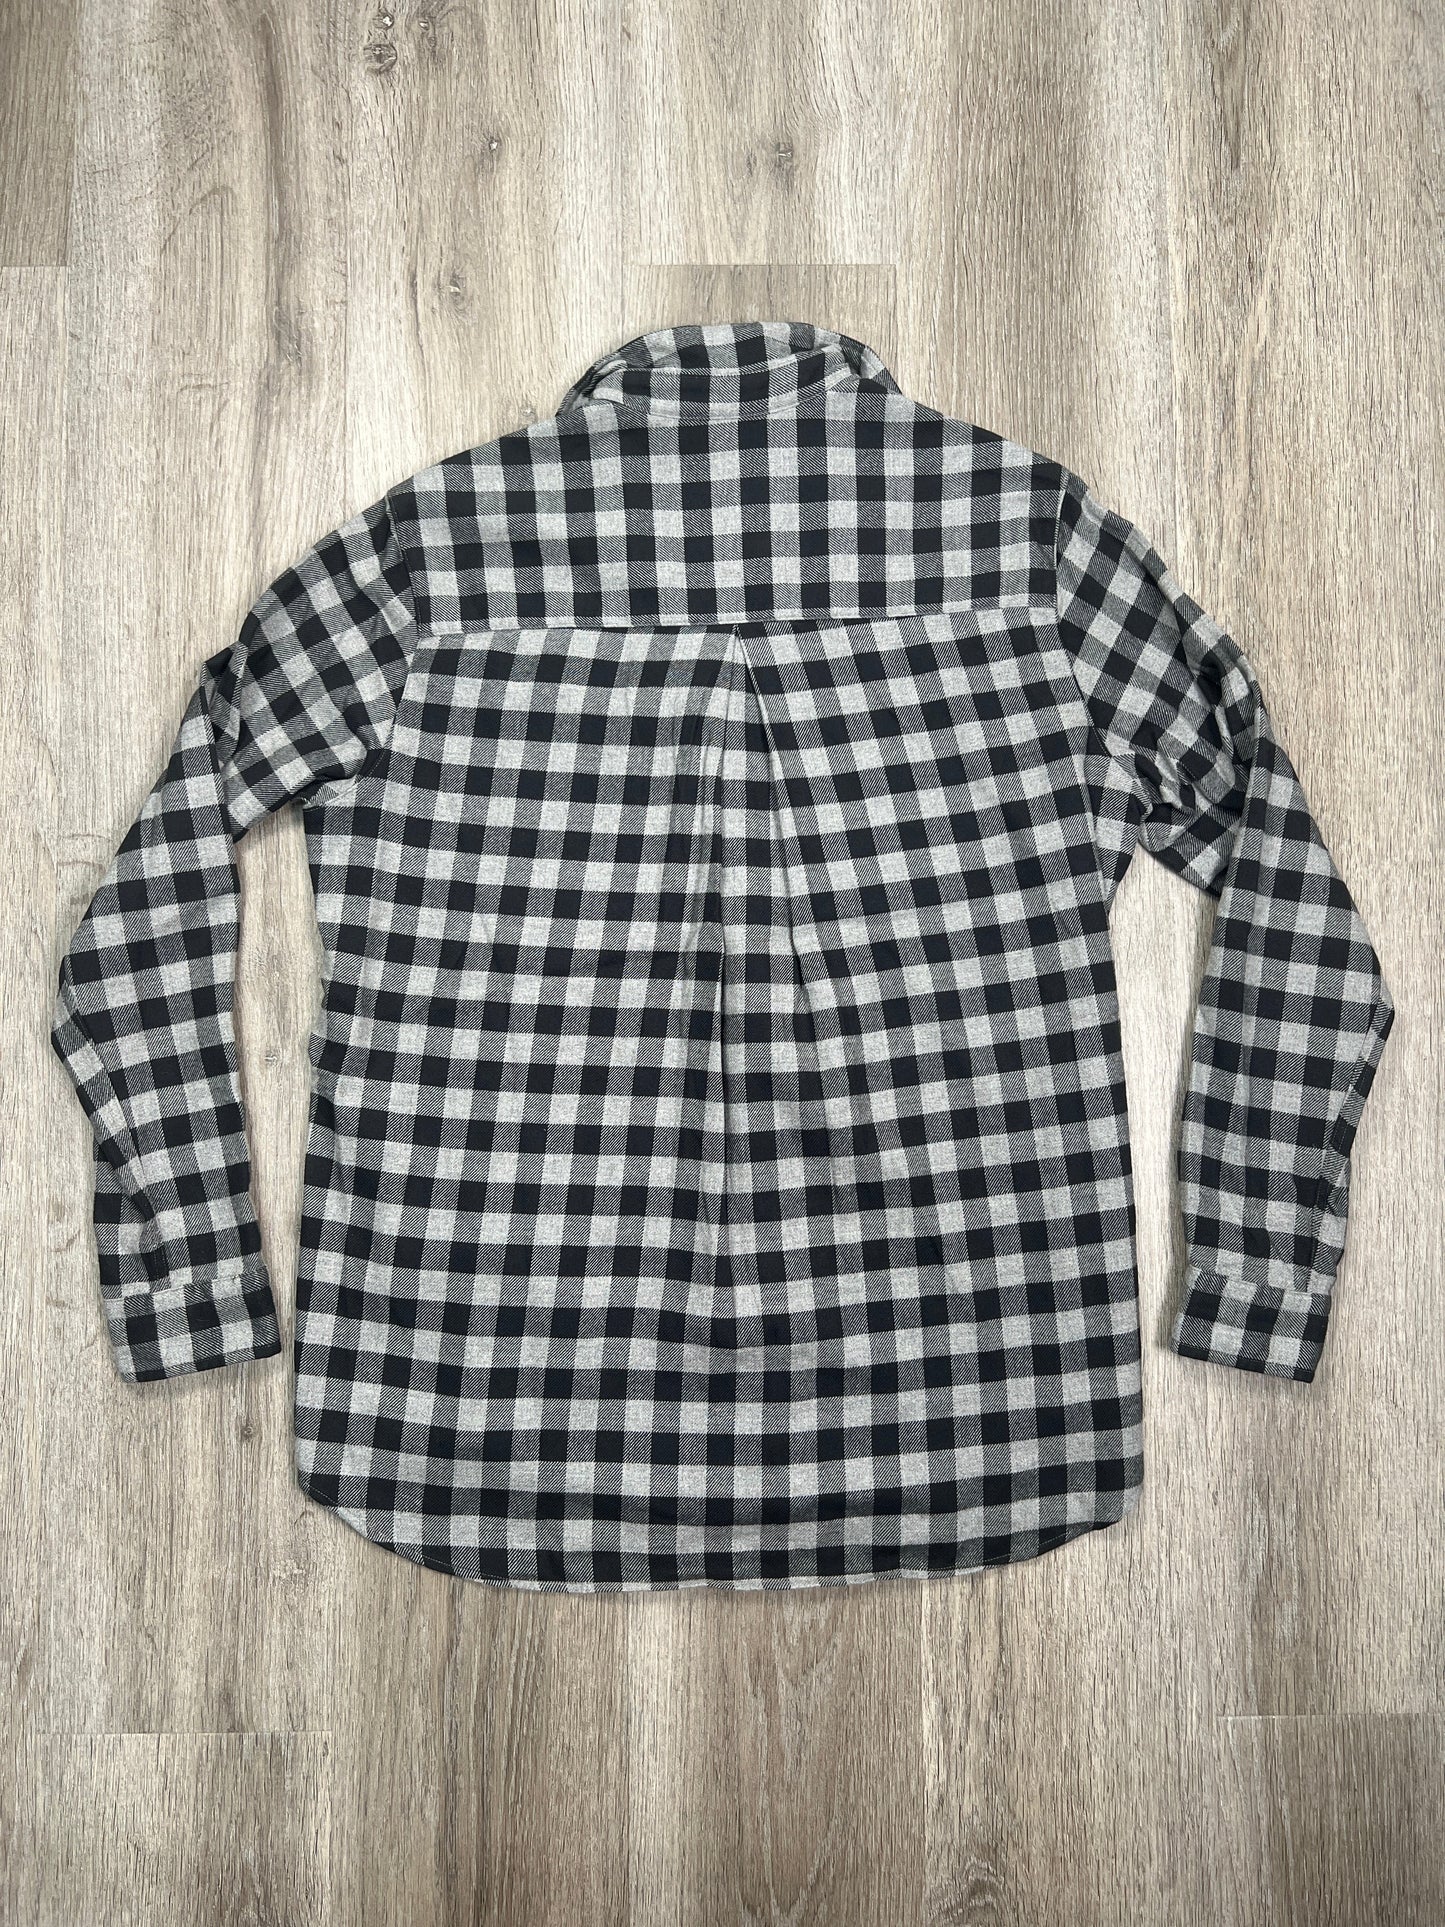 Checkered Pattern Top Long Sleeve Grayson, Size M